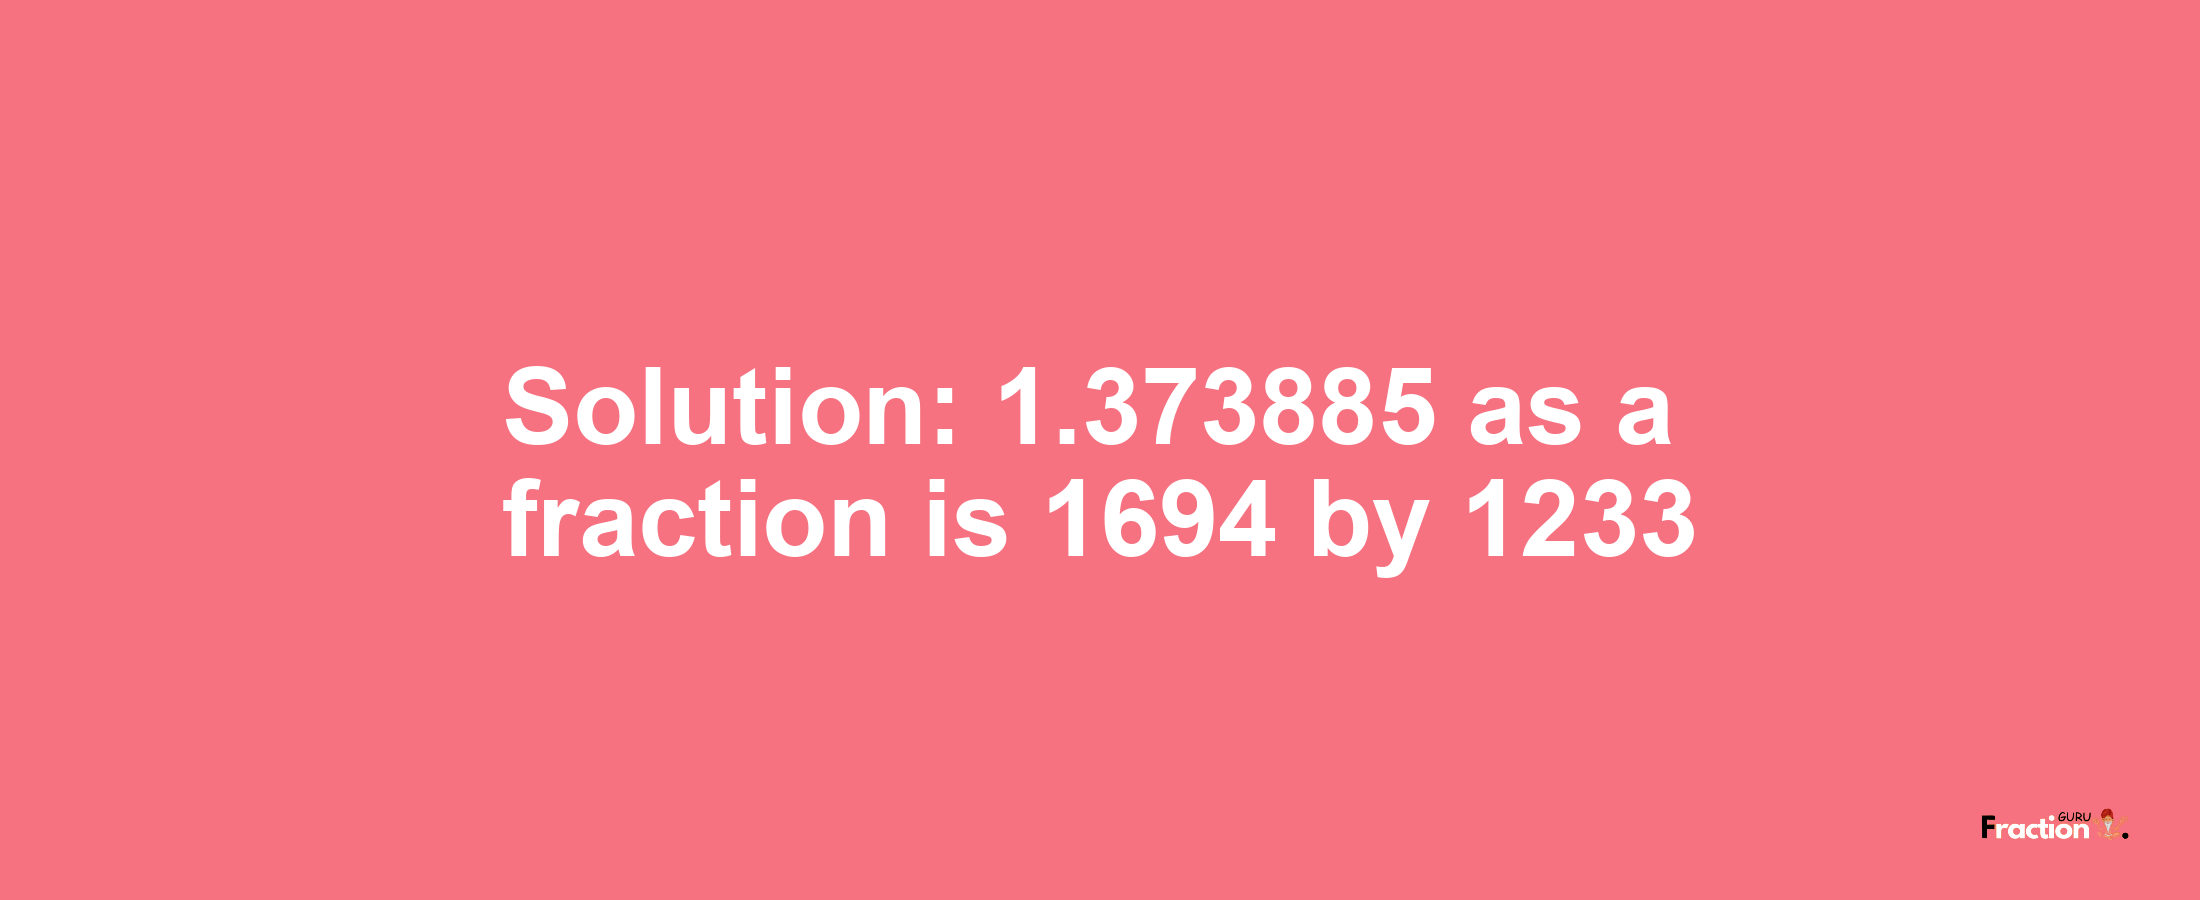 Solution:1.373885 as a fraction is 1694/1233